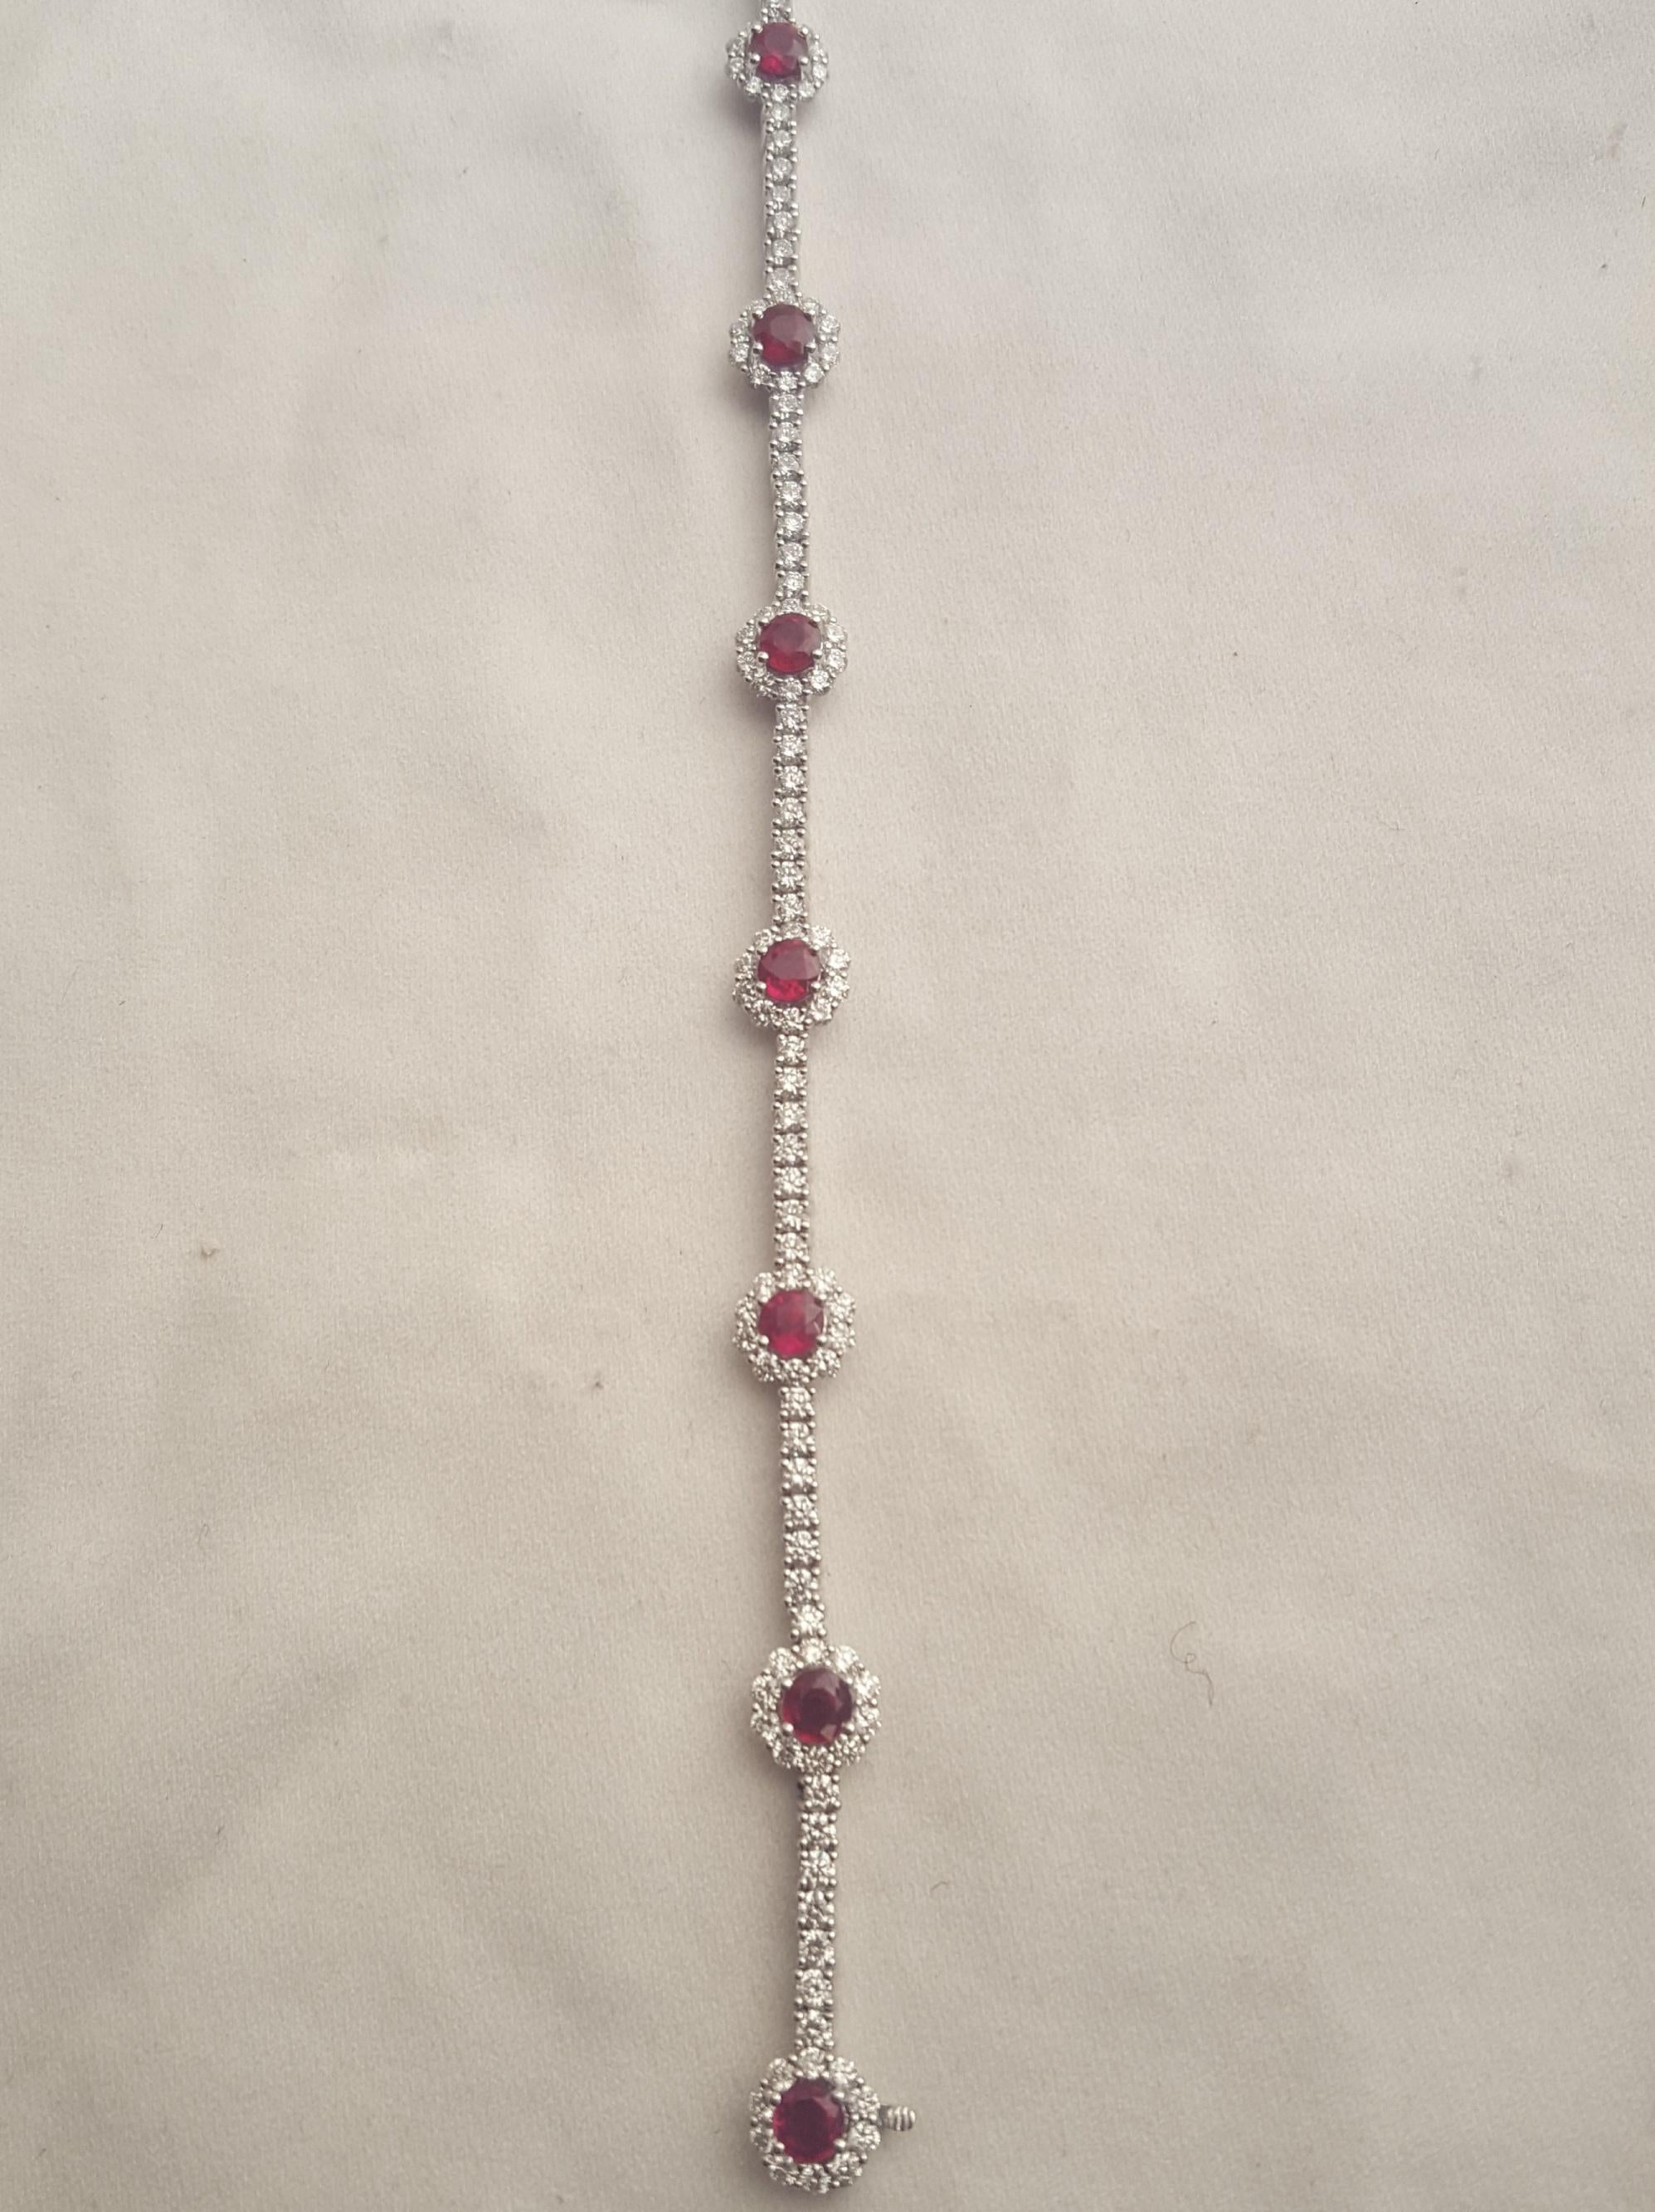 Brand new and Never worn!  Meticulously crafted in 18 karat white gold, this inline bracelet is a stand out!  Combining rubies and diamonds always creates an eye popping fashion statement!  Seven stations boast round perfectly matched faceted rubies